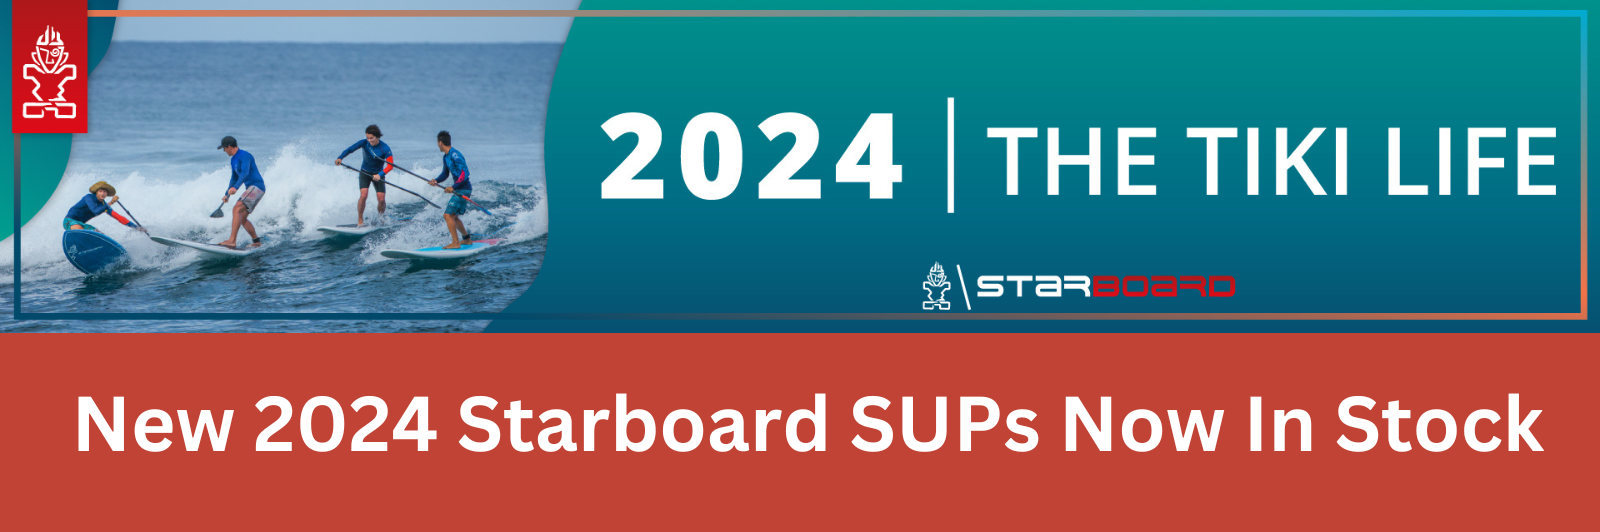 New 2024 Starboards Party Wave